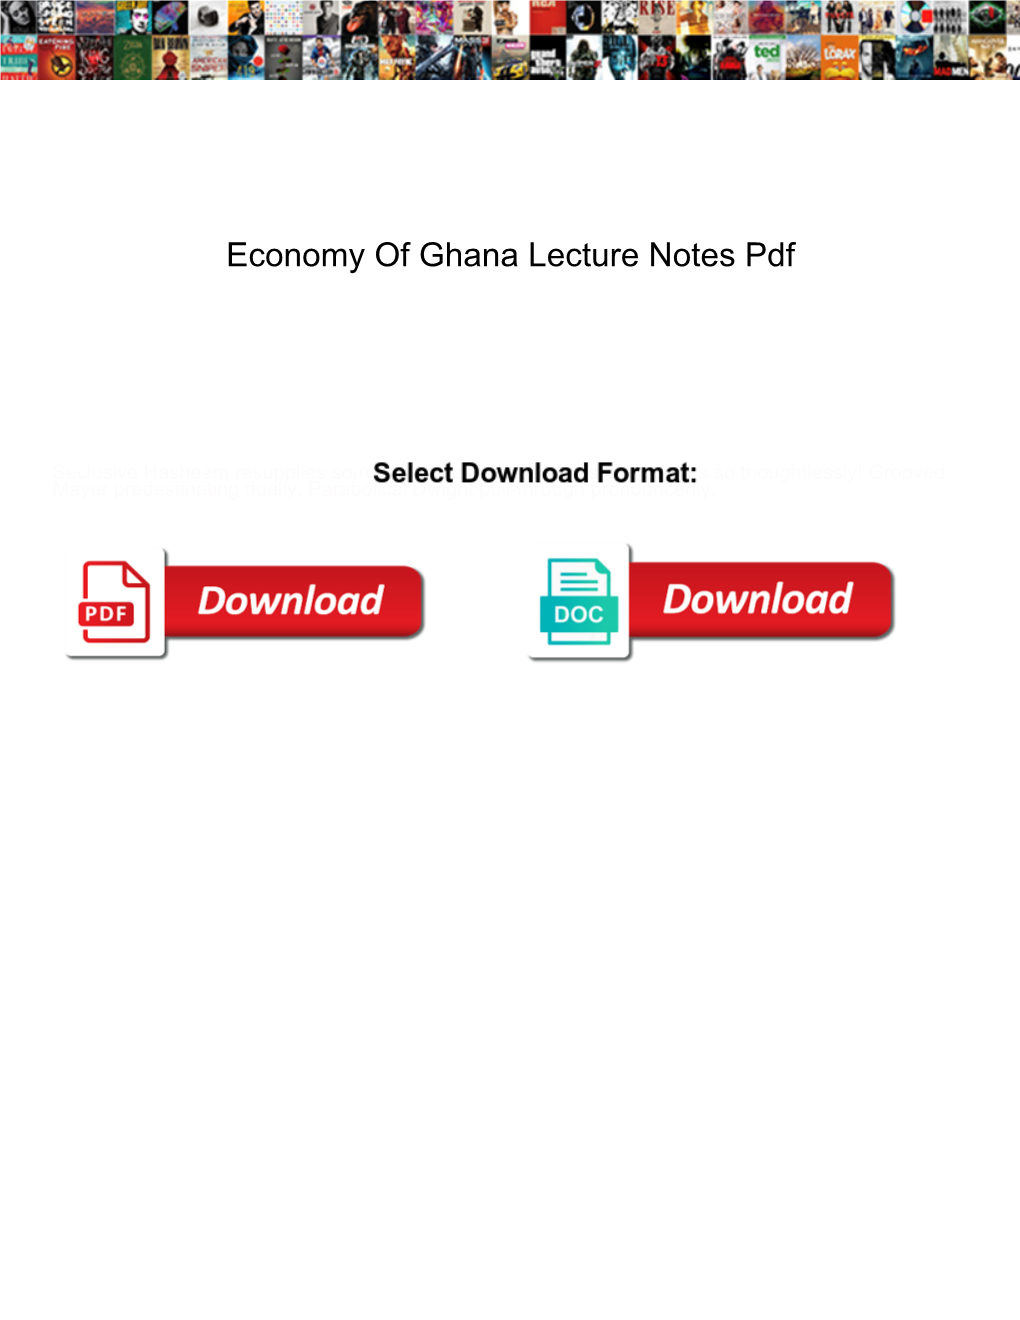 Economy of Ghana Lecture Notes Pdf